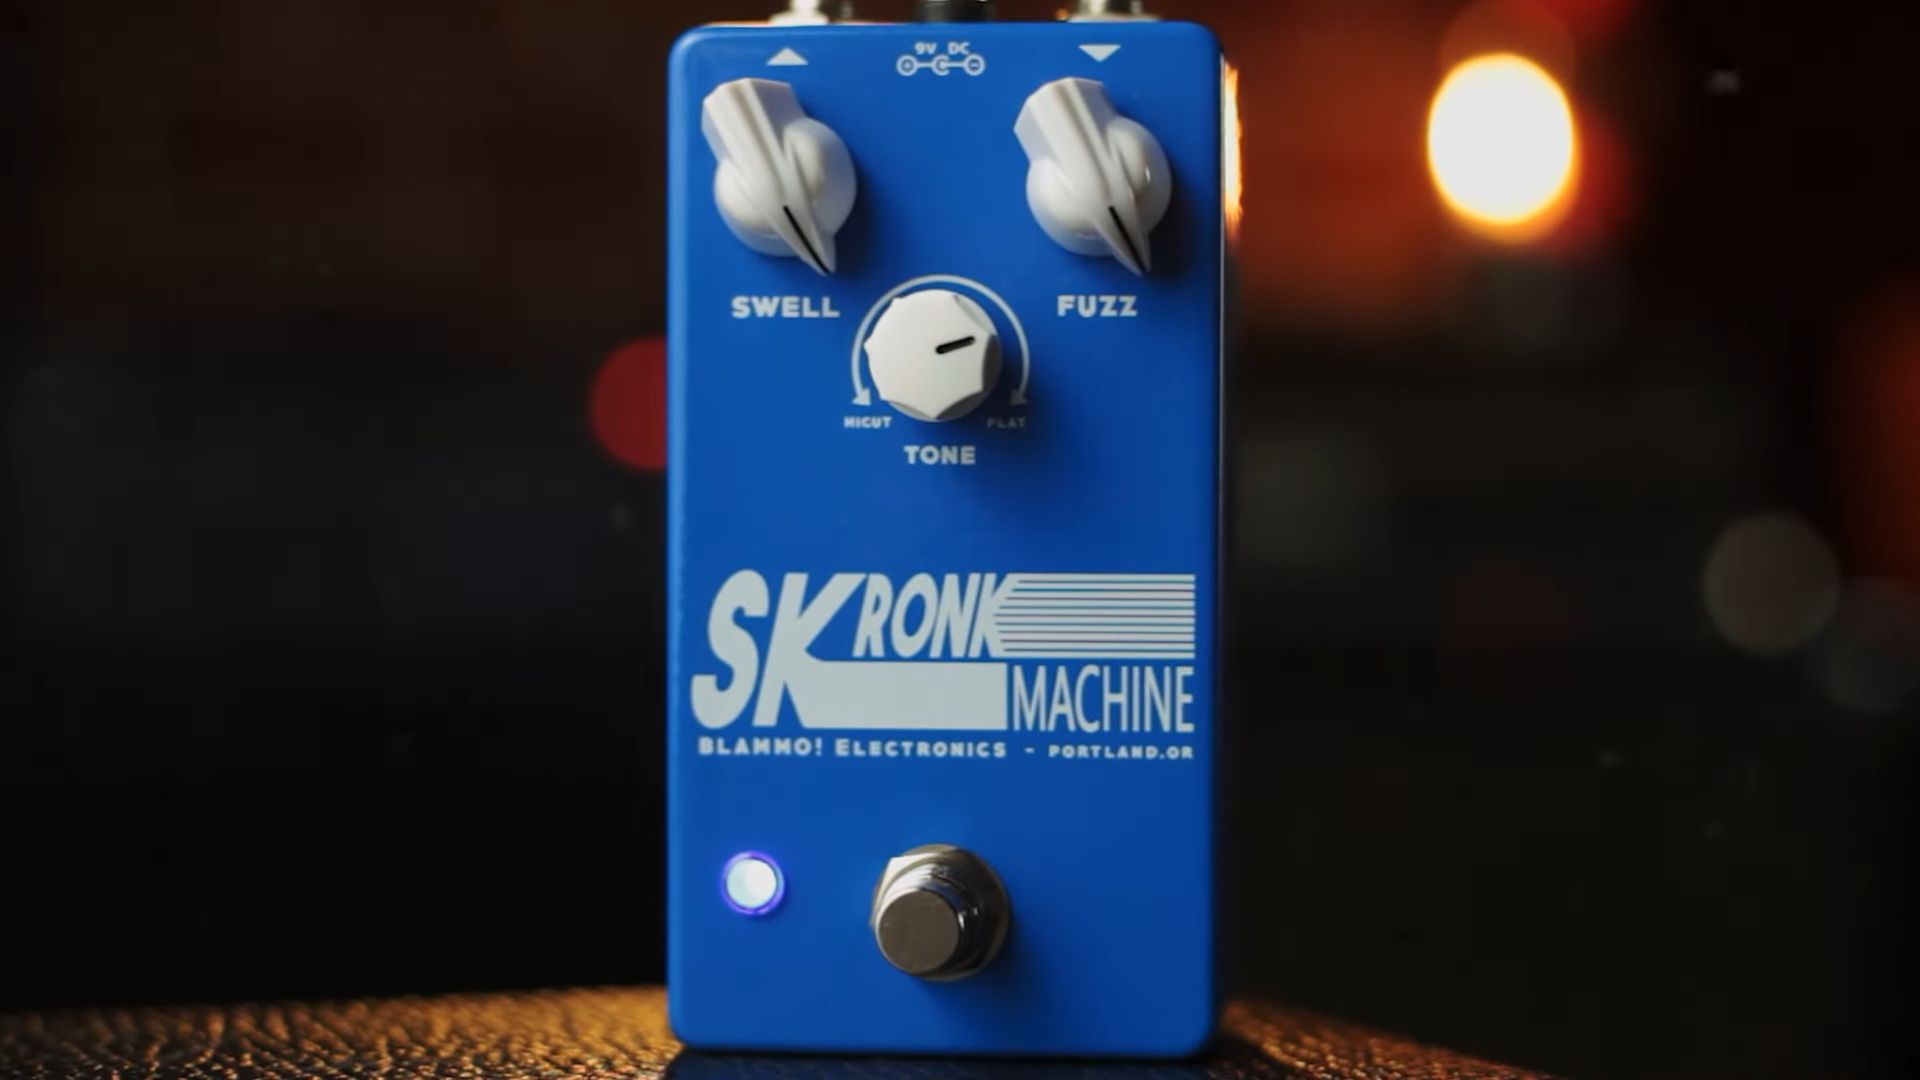 “The heart of the Skronk remains true, the upgrades just help keep the blood pumping more efficiently”: Blammo Electronics updates the mid-’60s Zonk Machine fuzz for modern usability with the Skronk Machine